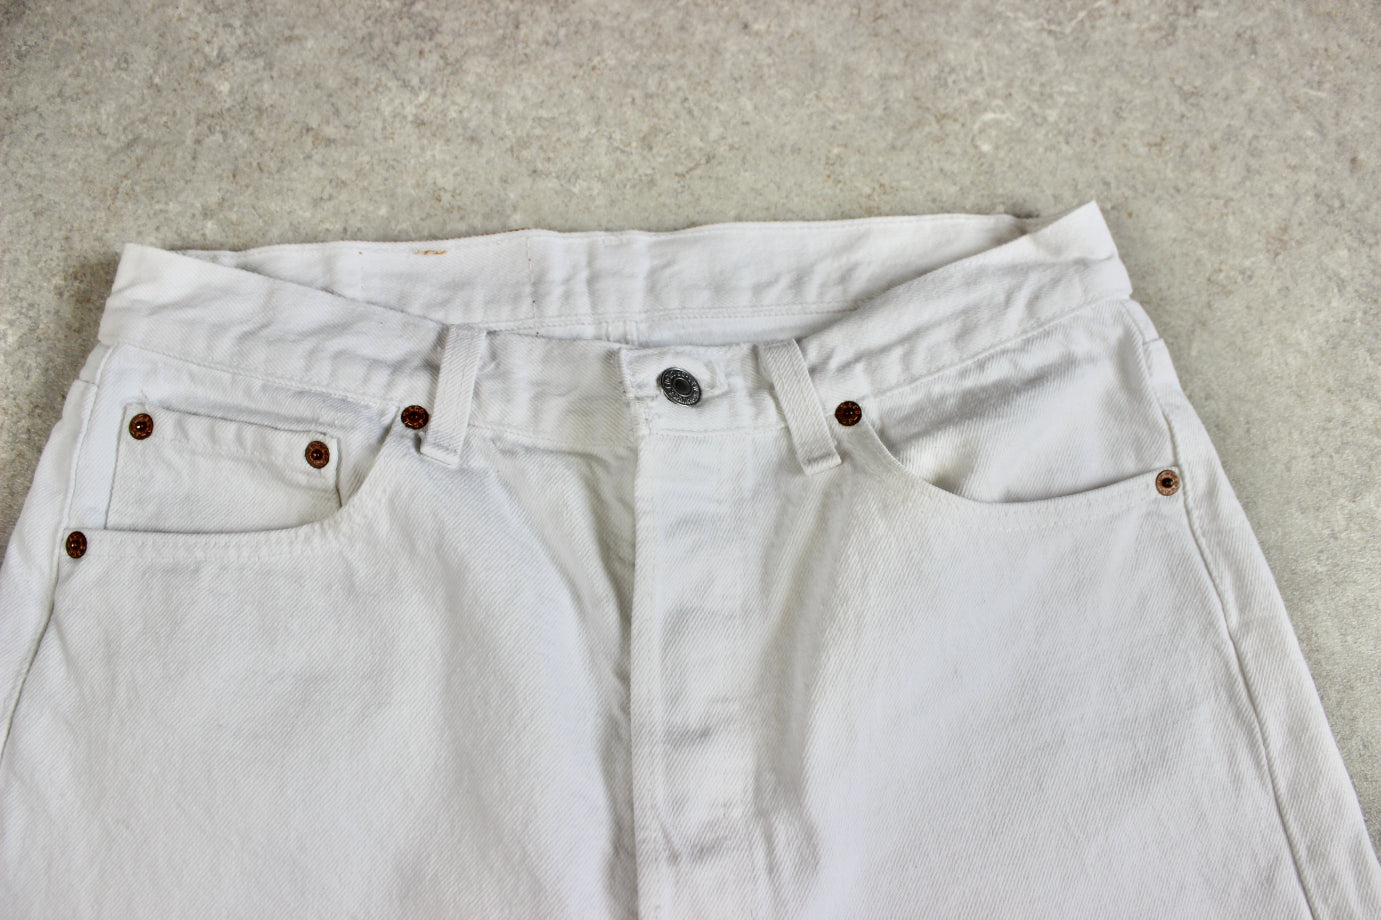 Levi's - 501 Jeans Vintage Made in USA - White - 33/32